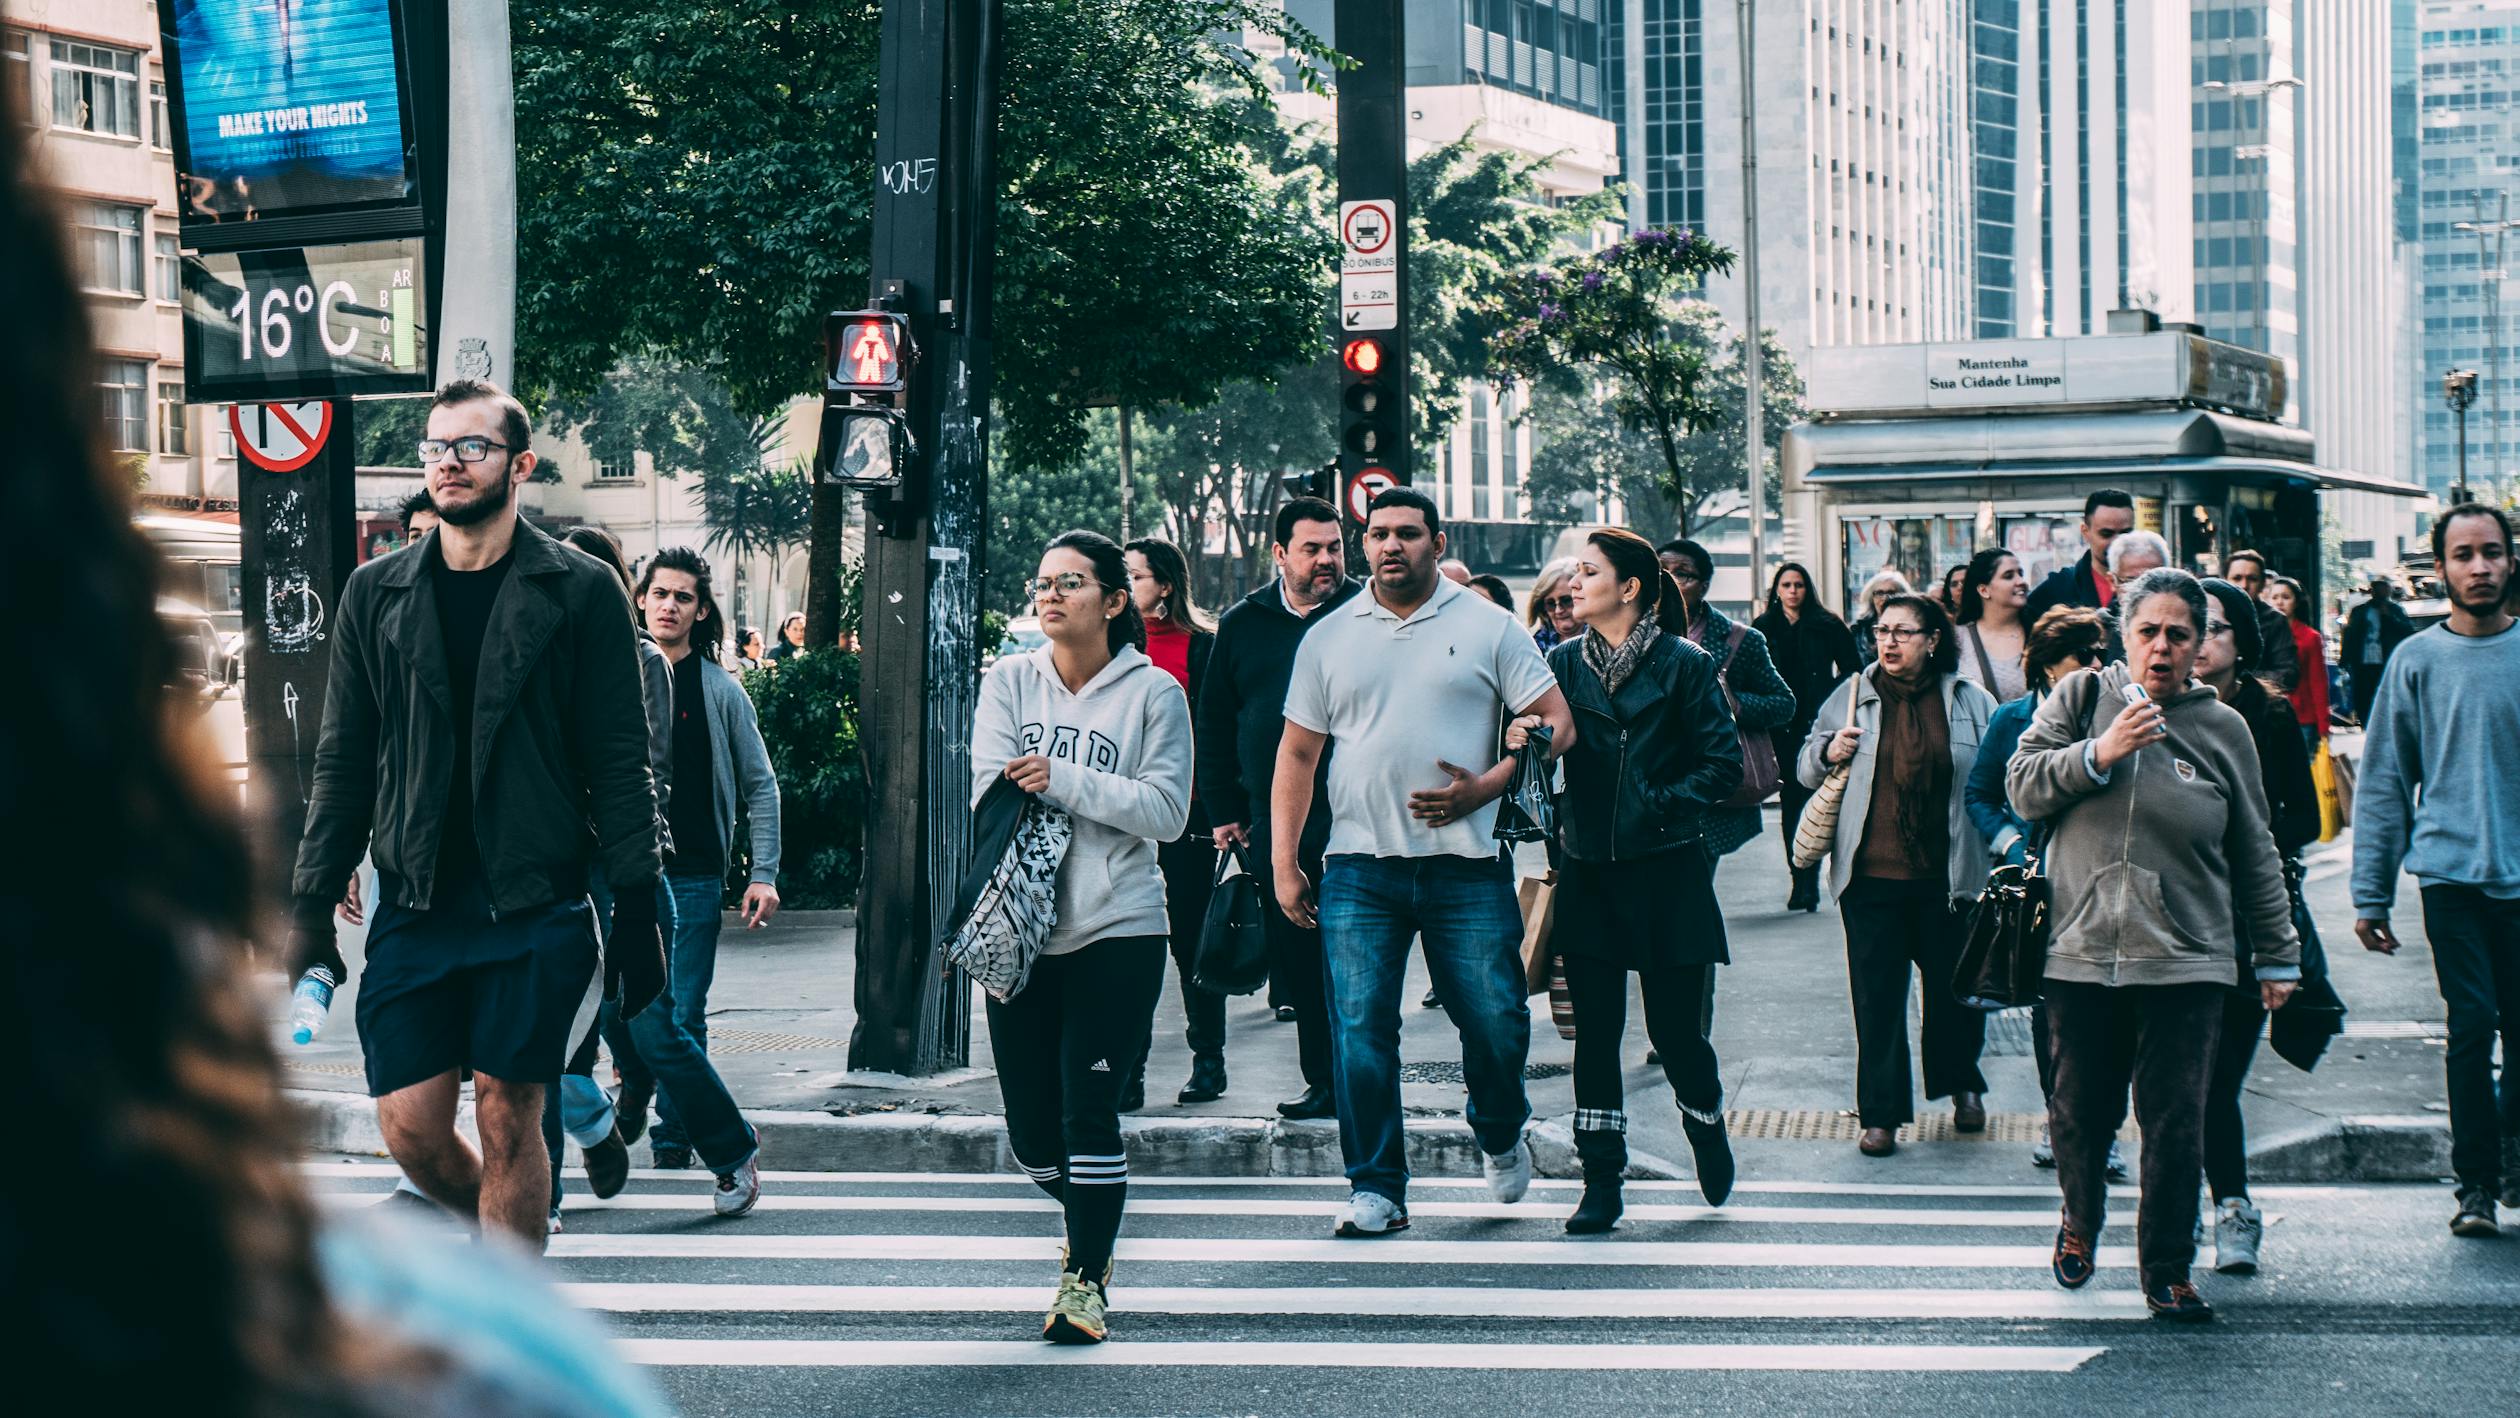 People walking down the street - the population might be a reason for moving your business to New York